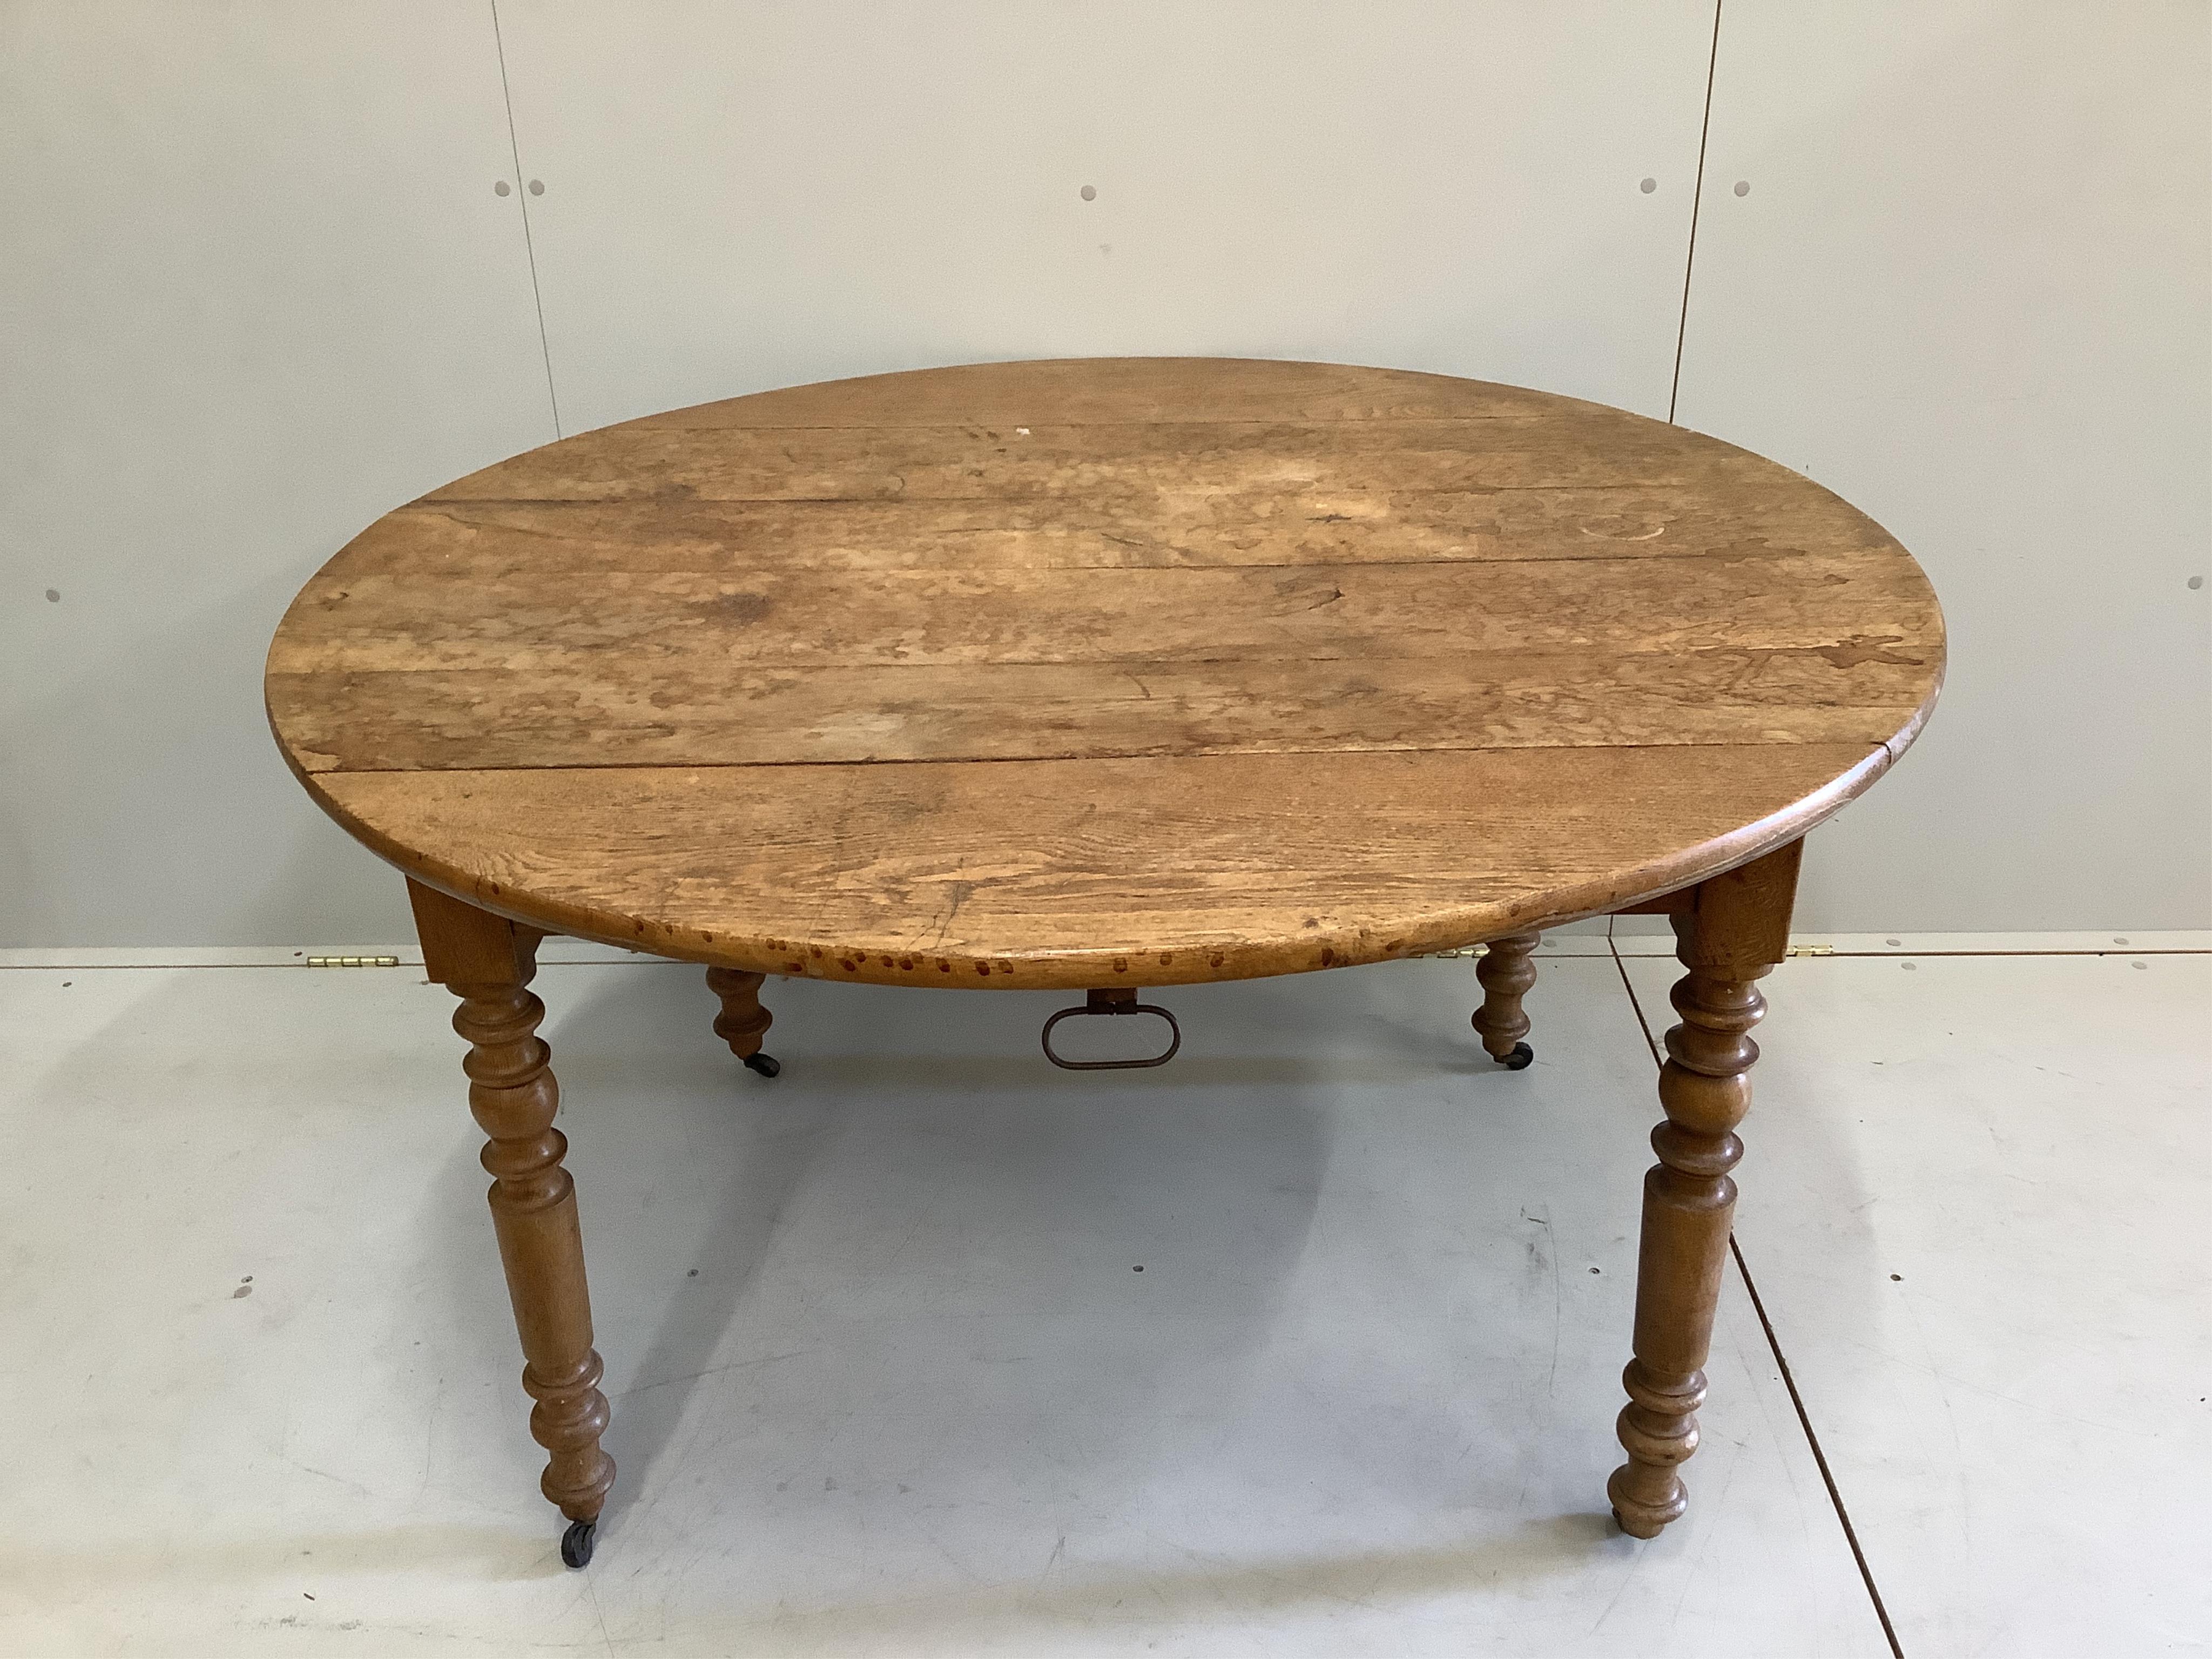 A 19th century French oak drop flap dining table, width 124cm, depth 76cm, height 73cm